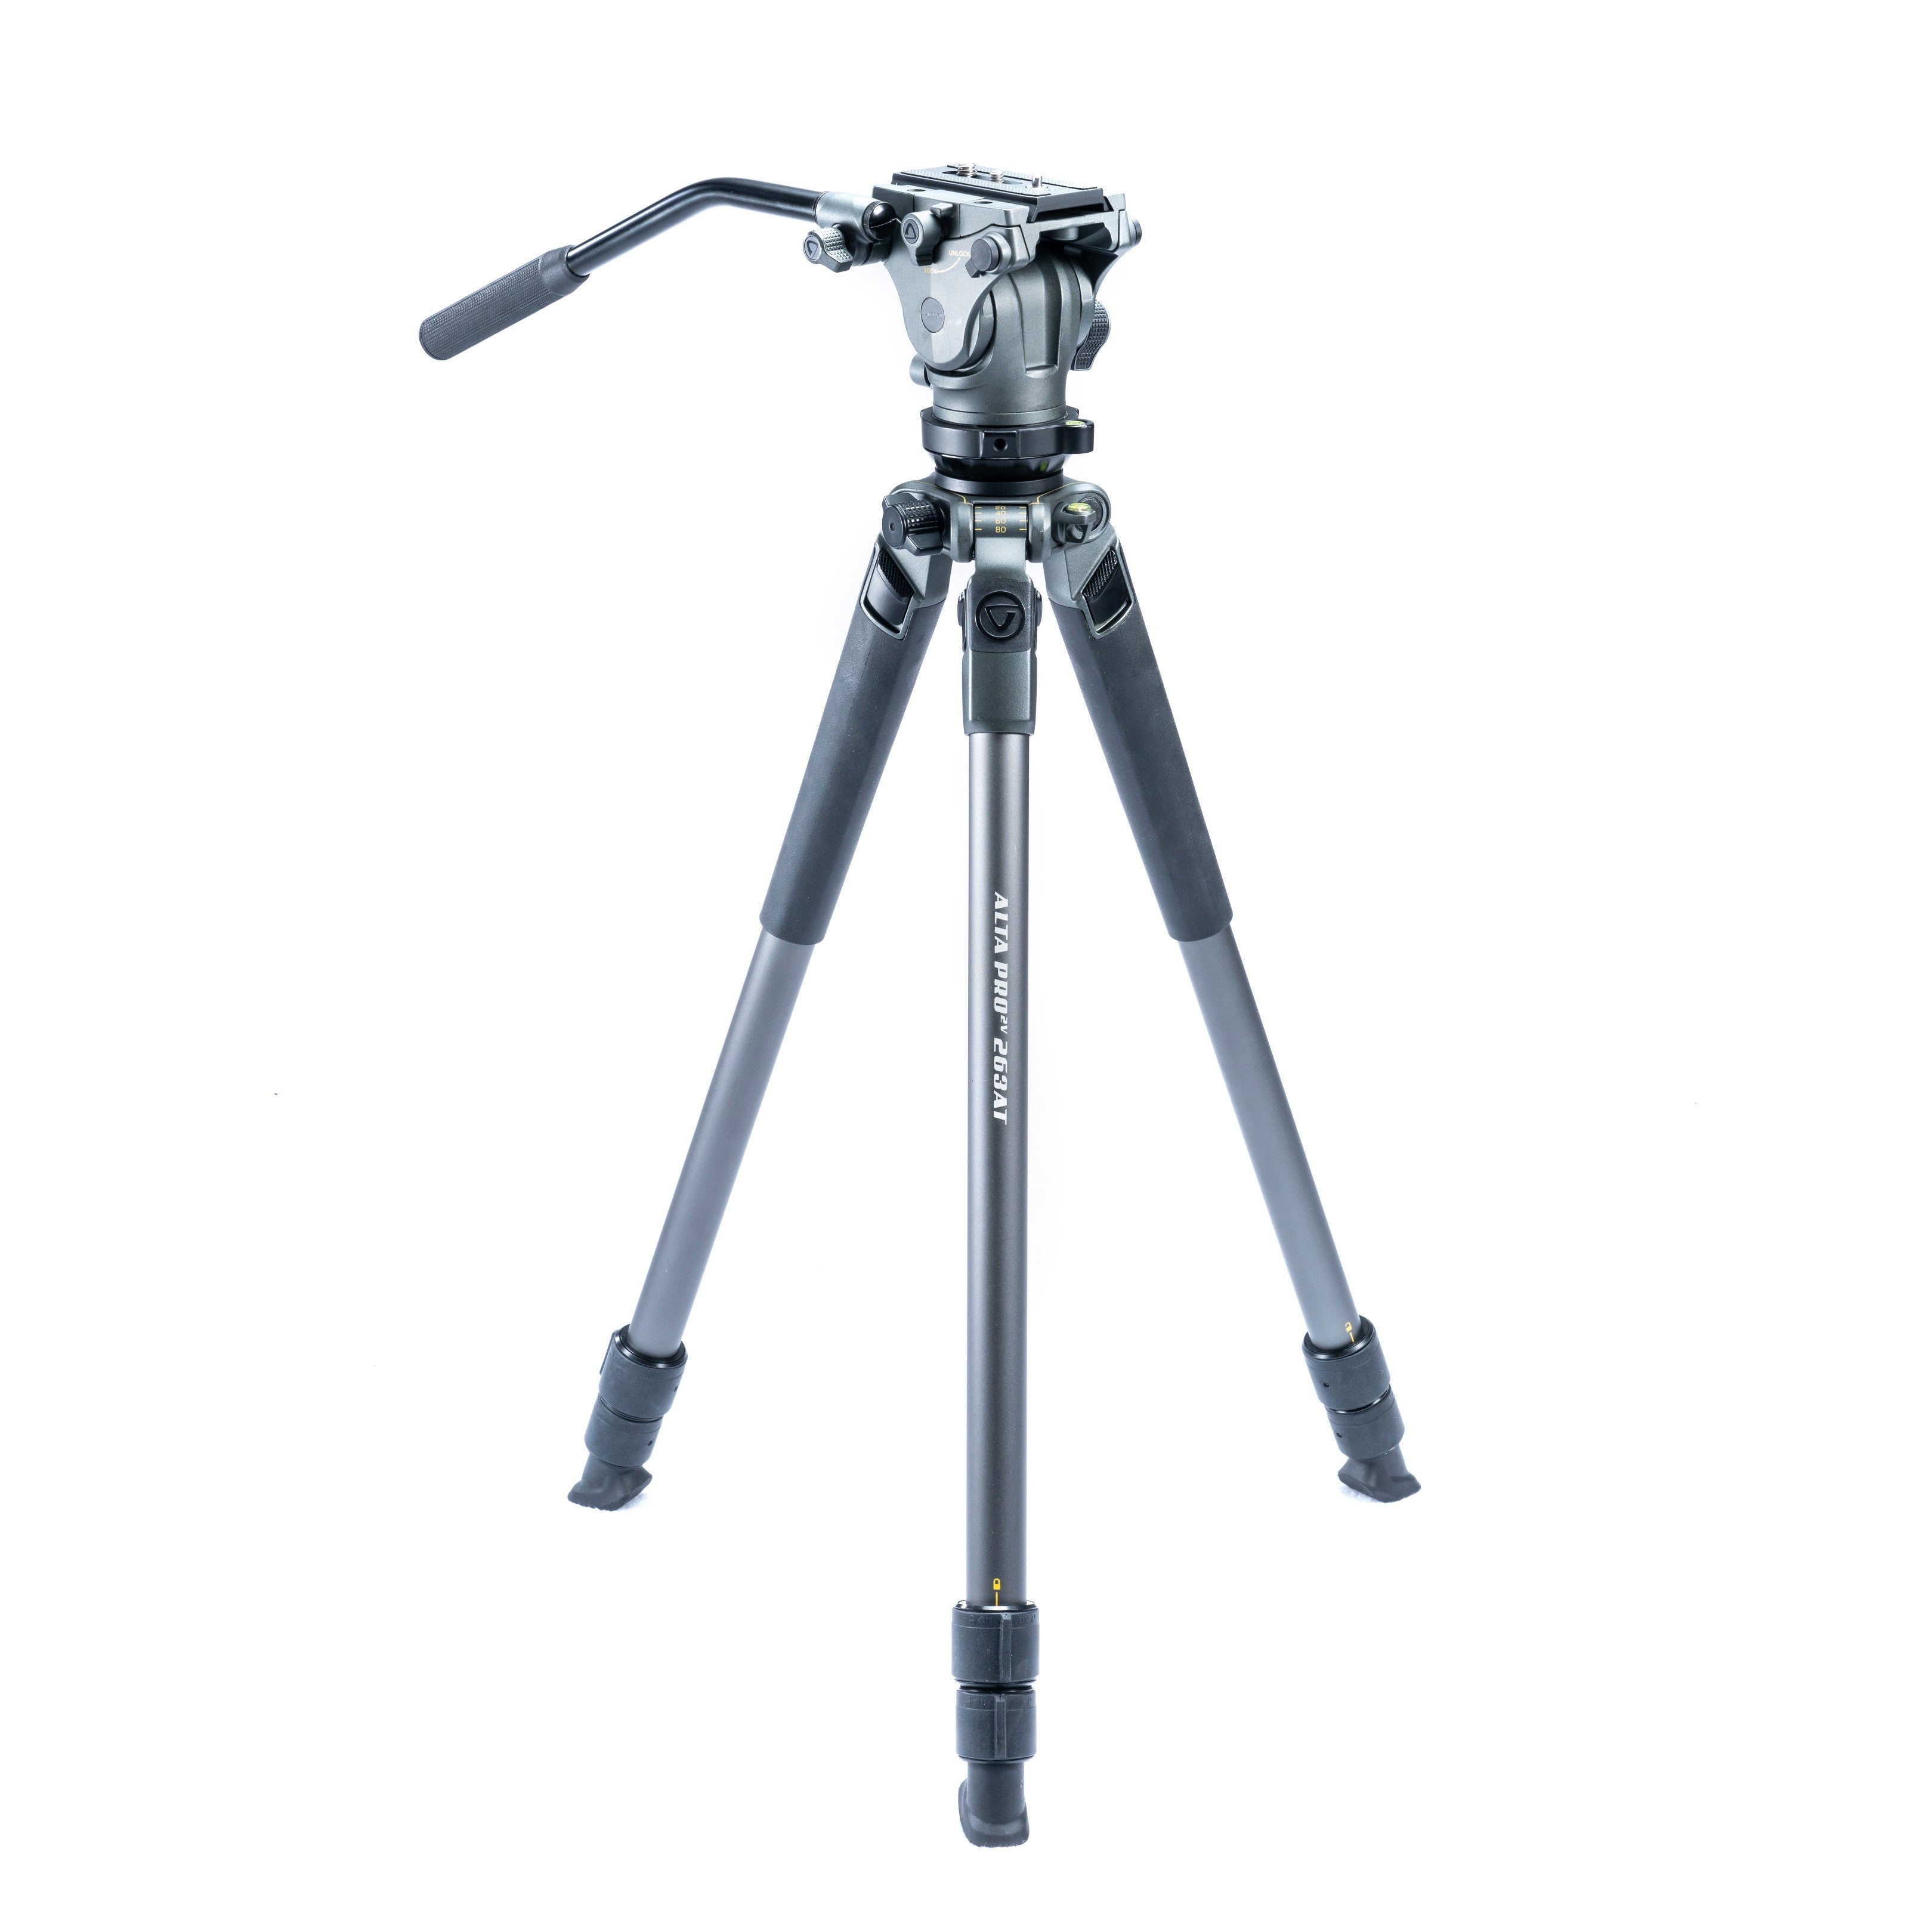 ALTA PRO 2V 263AVP Aluminum Tripod with 2-Way Video Pan Head - Rated at  11lbs/5kg